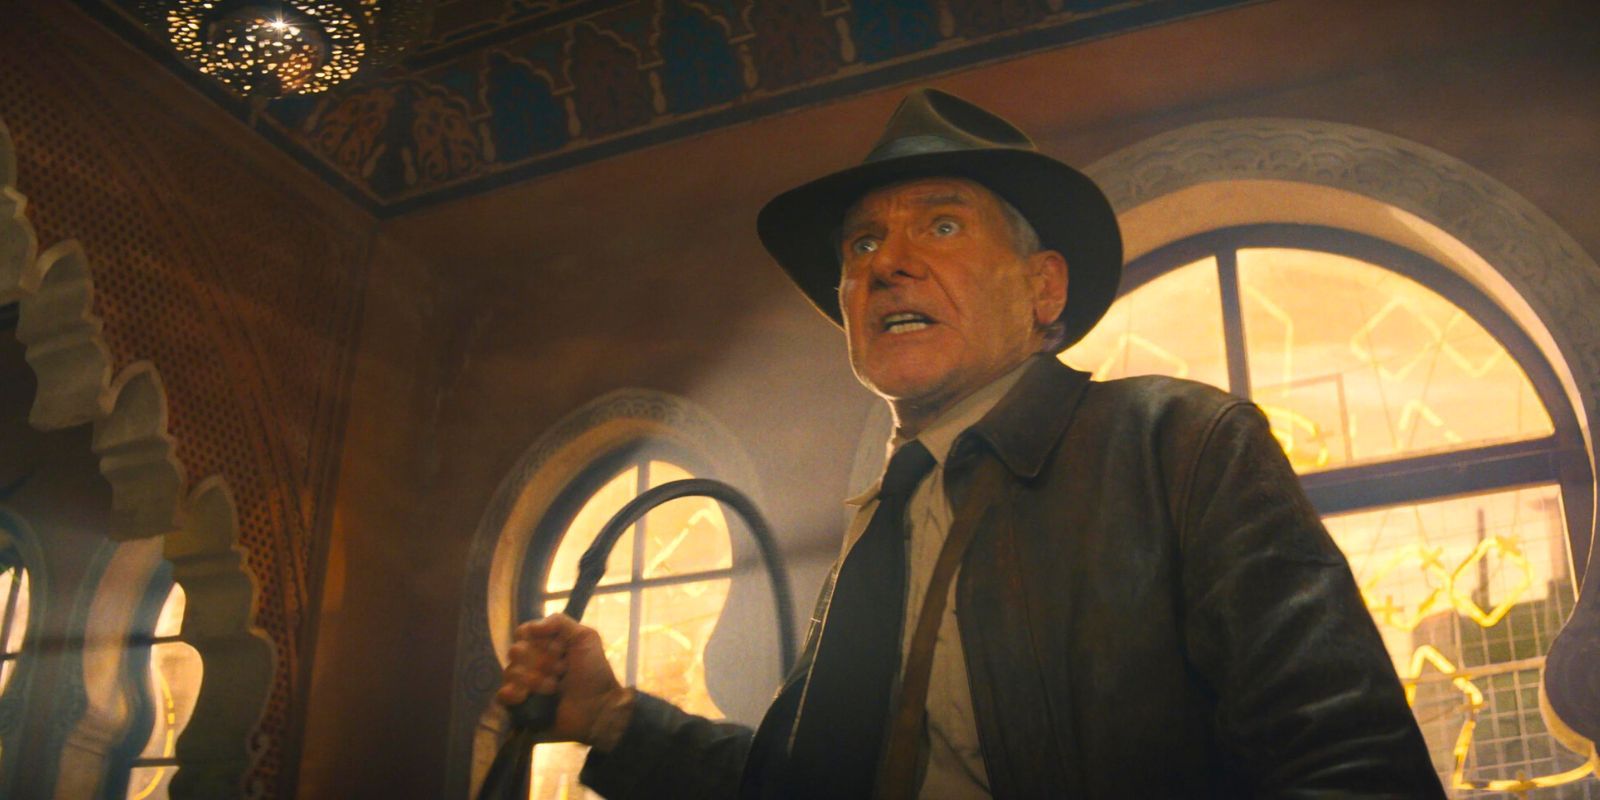 Indiana Jones, whip in hand, snarling at a group of thugs